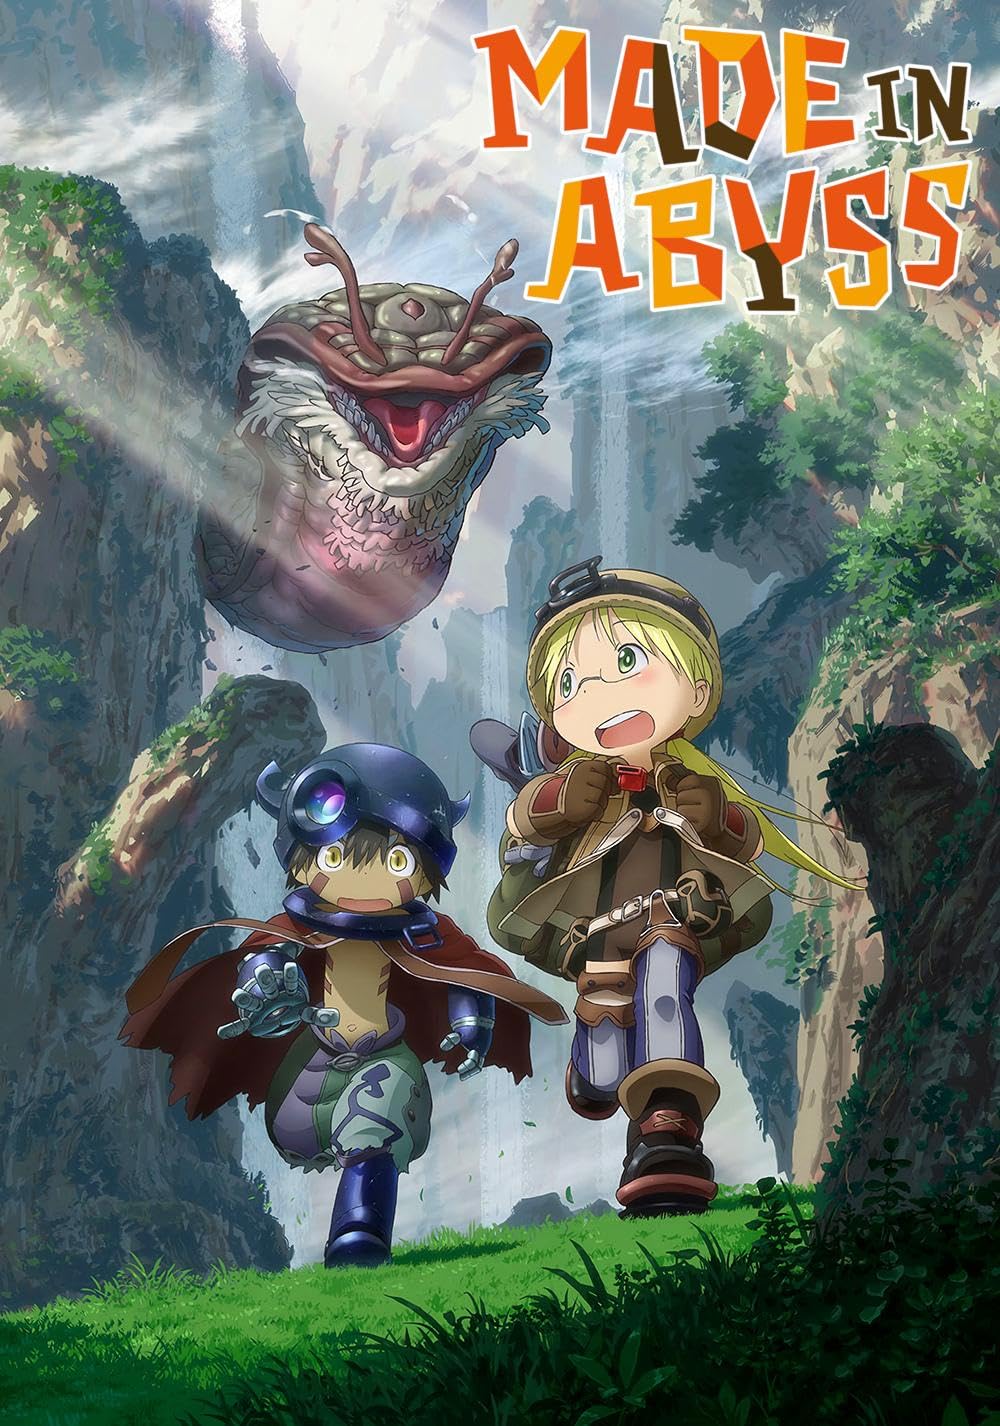 Diving Deeper into the Abyss: A Comprehensive Review of “Made in Abyss” Volumes 11-12